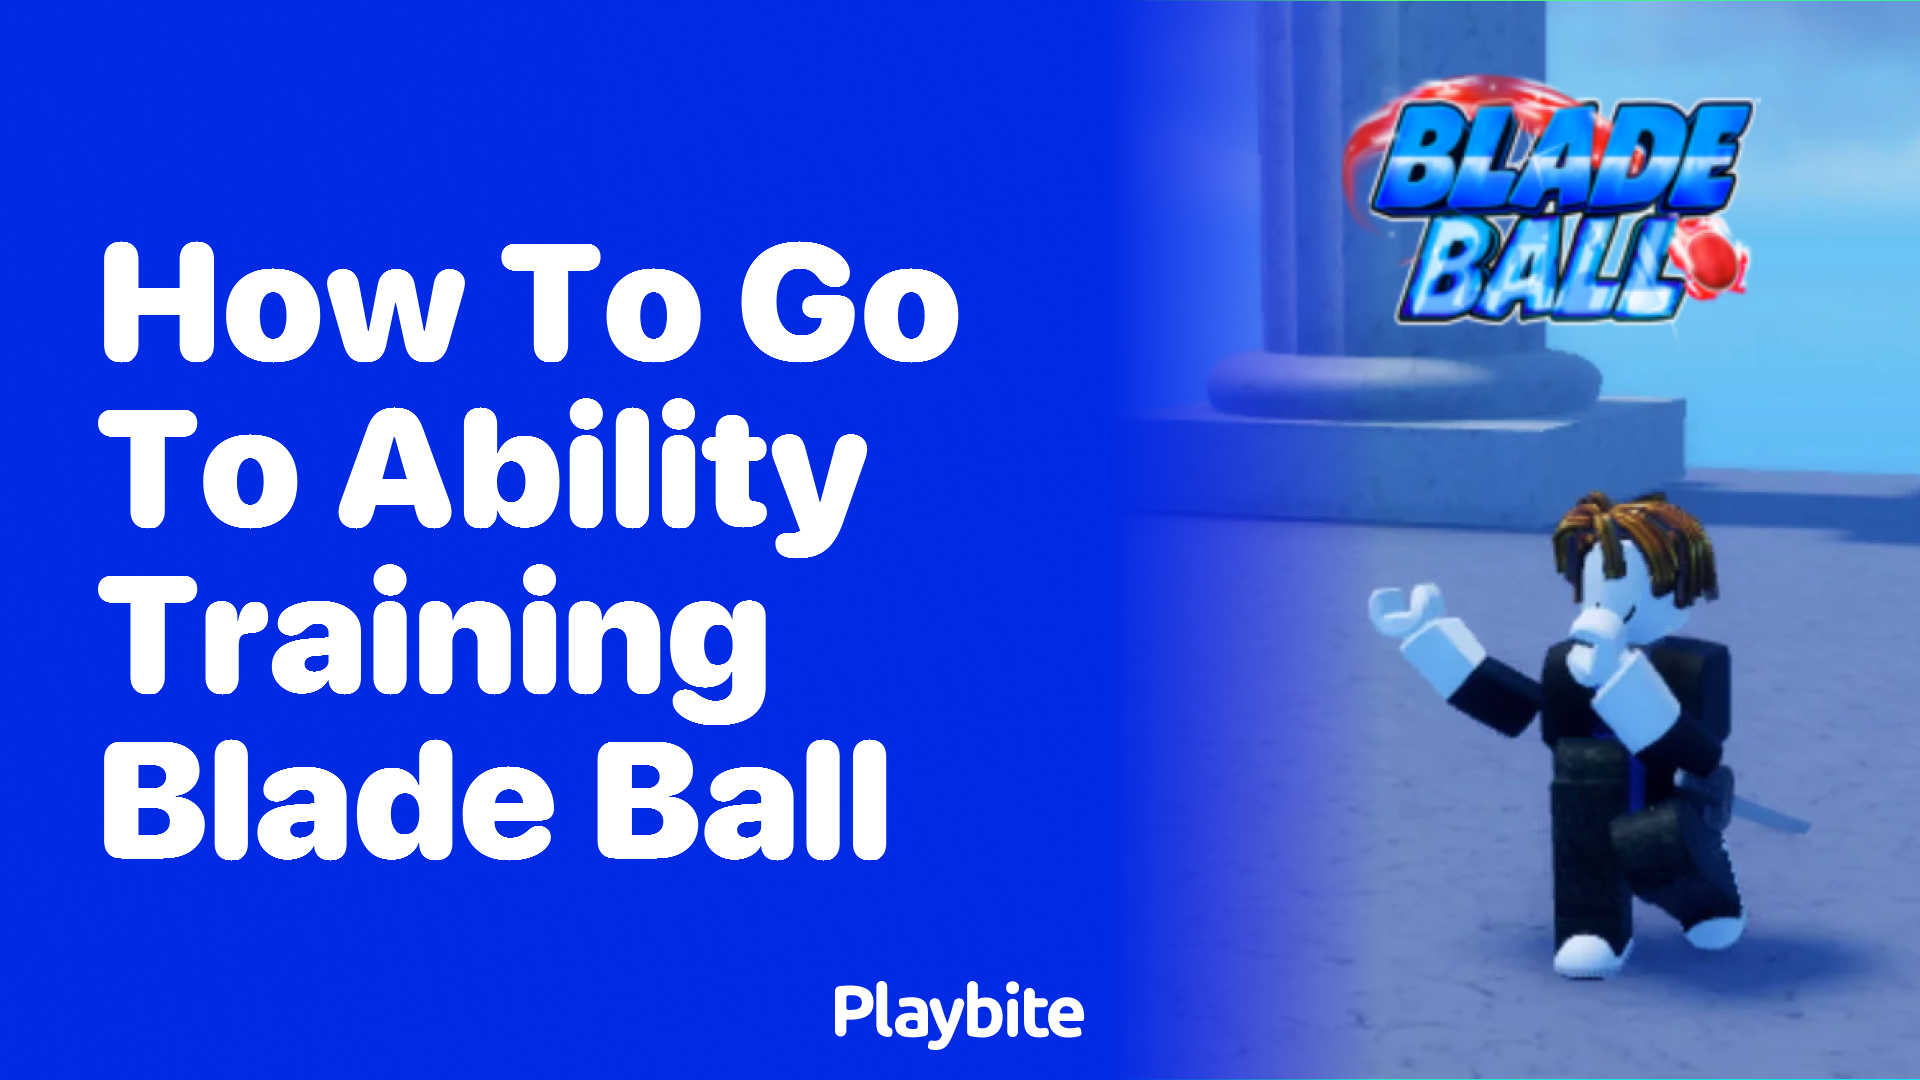 How to Go to Ability Training in Blade Ball